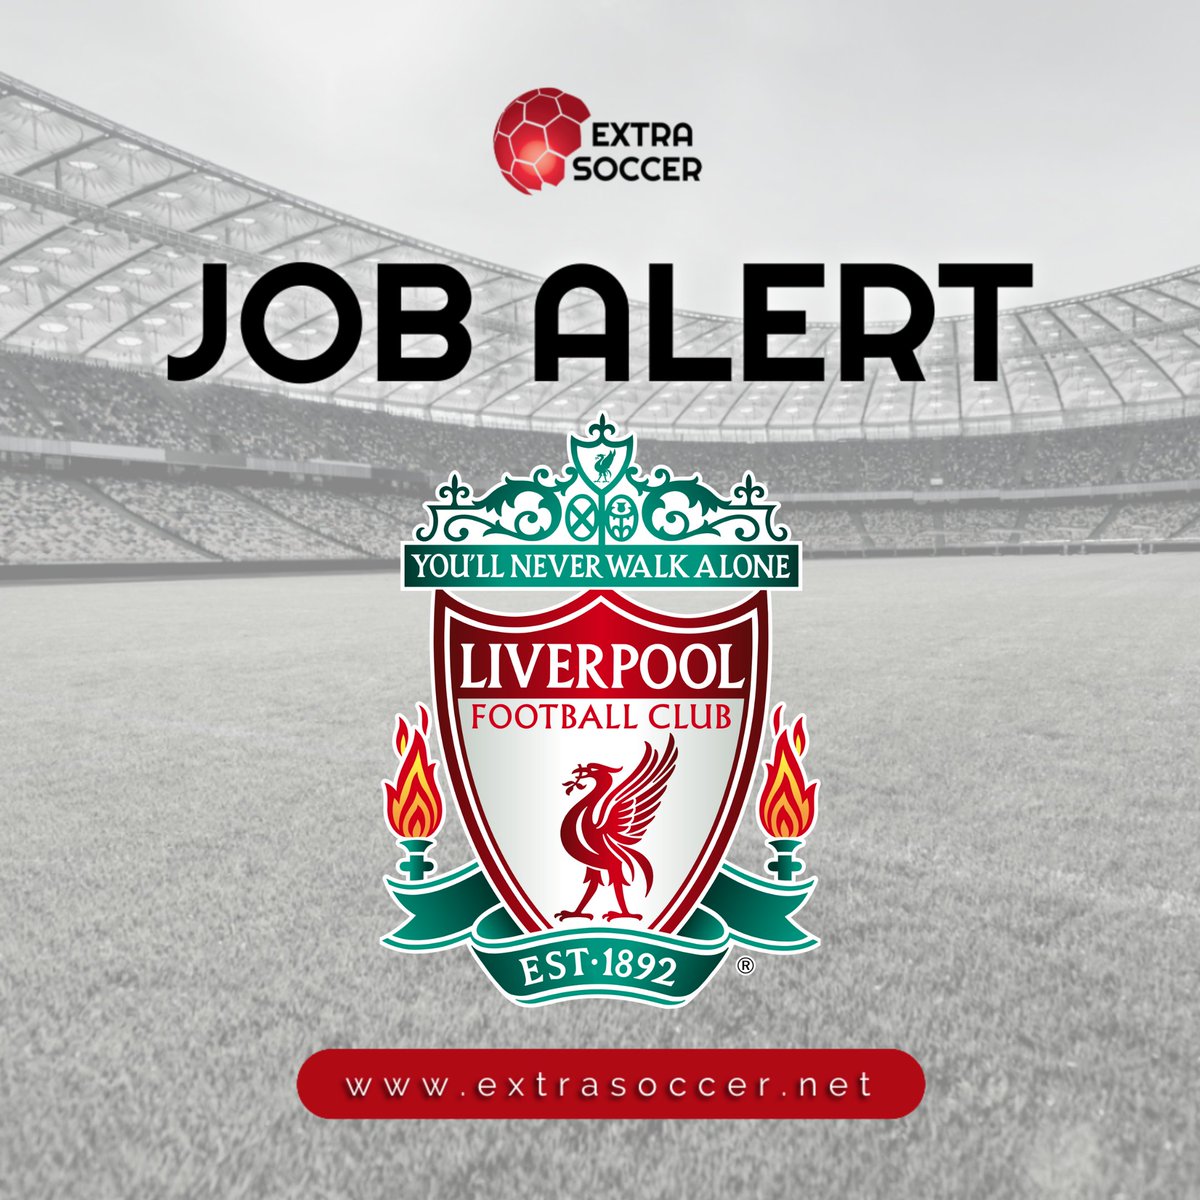 🚨⚽  𝙉𝙀𝙒 𝙅𝙊𝘽 𝘼𝙇𝙀𝙍𝙏! 📣 

Liverpool FC 🏴󠁧󠁢󠁥󠁮󠁧󠁿
Elite Local Scout - North West

Link 👉 extrasoccer.net/soccer-jobs

🌐 extrasoccer.net/membership

#football #soccer #recruiting #jobs #footballjobs #soccerjobs #vacancies #footballcoach #liverpool #lfc